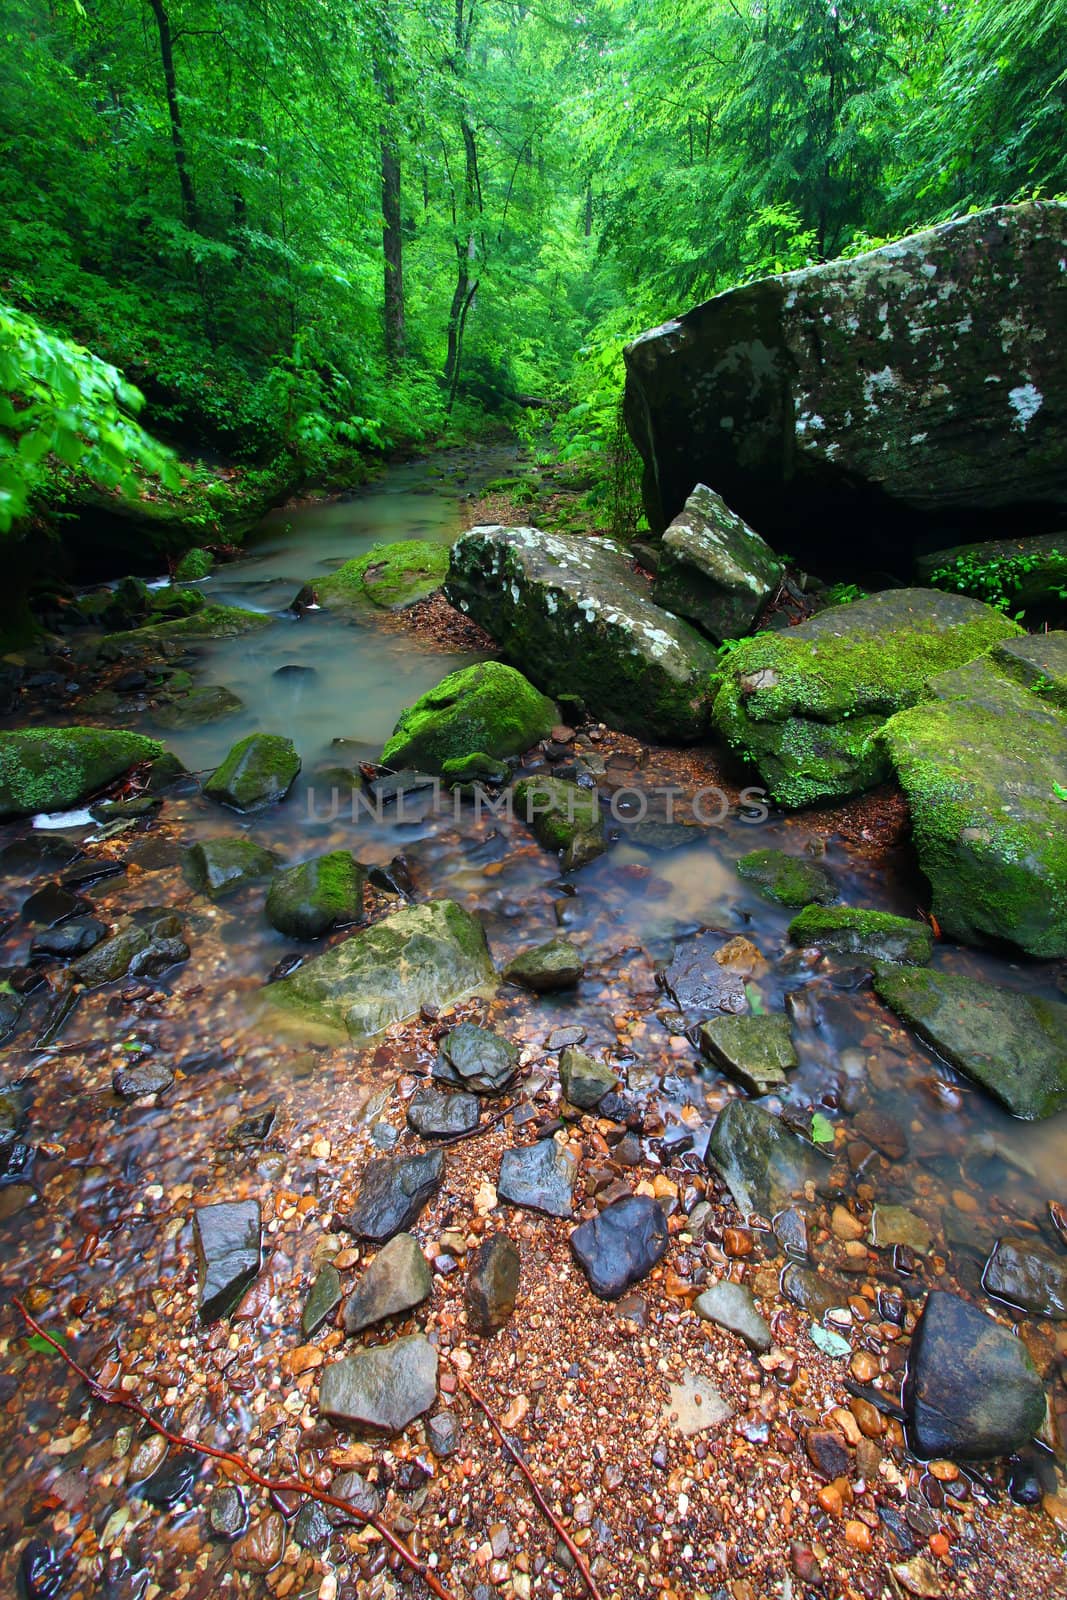 Tranquil stream cuts a deep gorge through the lush forests of northern Alabama.